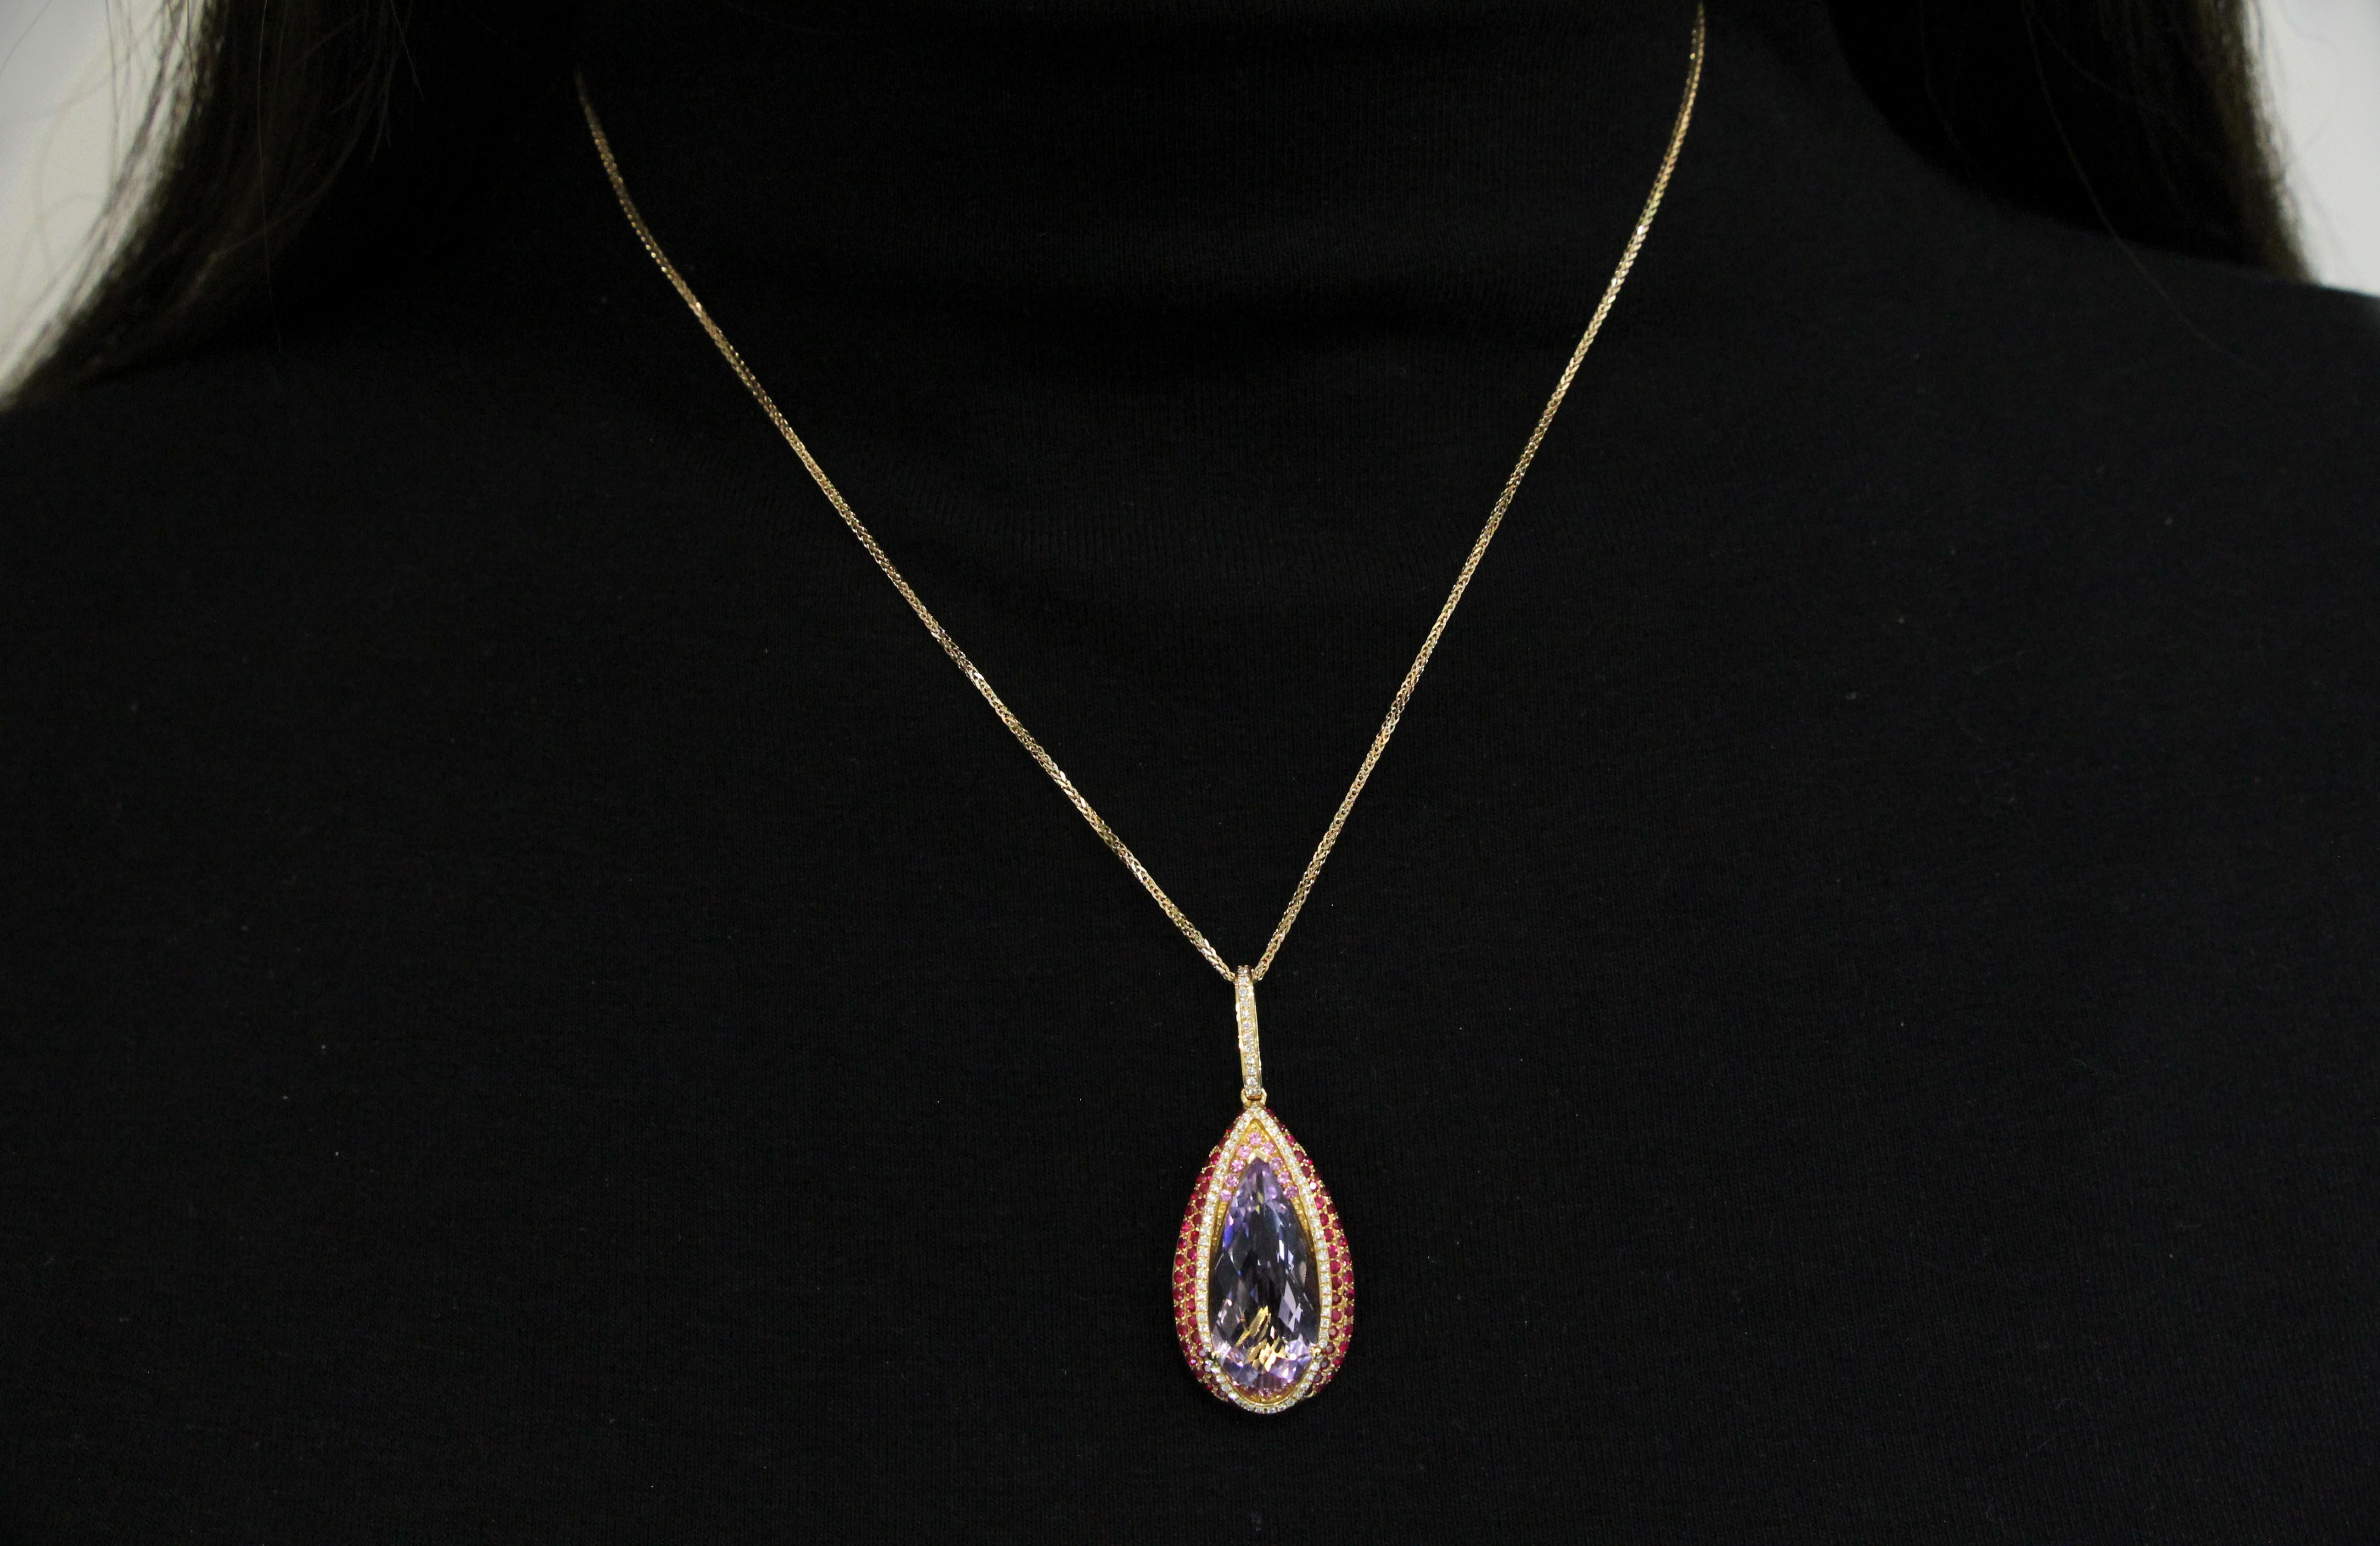 18 Karat Gold Amethyst Pendant with Necklace In New Condition For Sale In Macau, MO